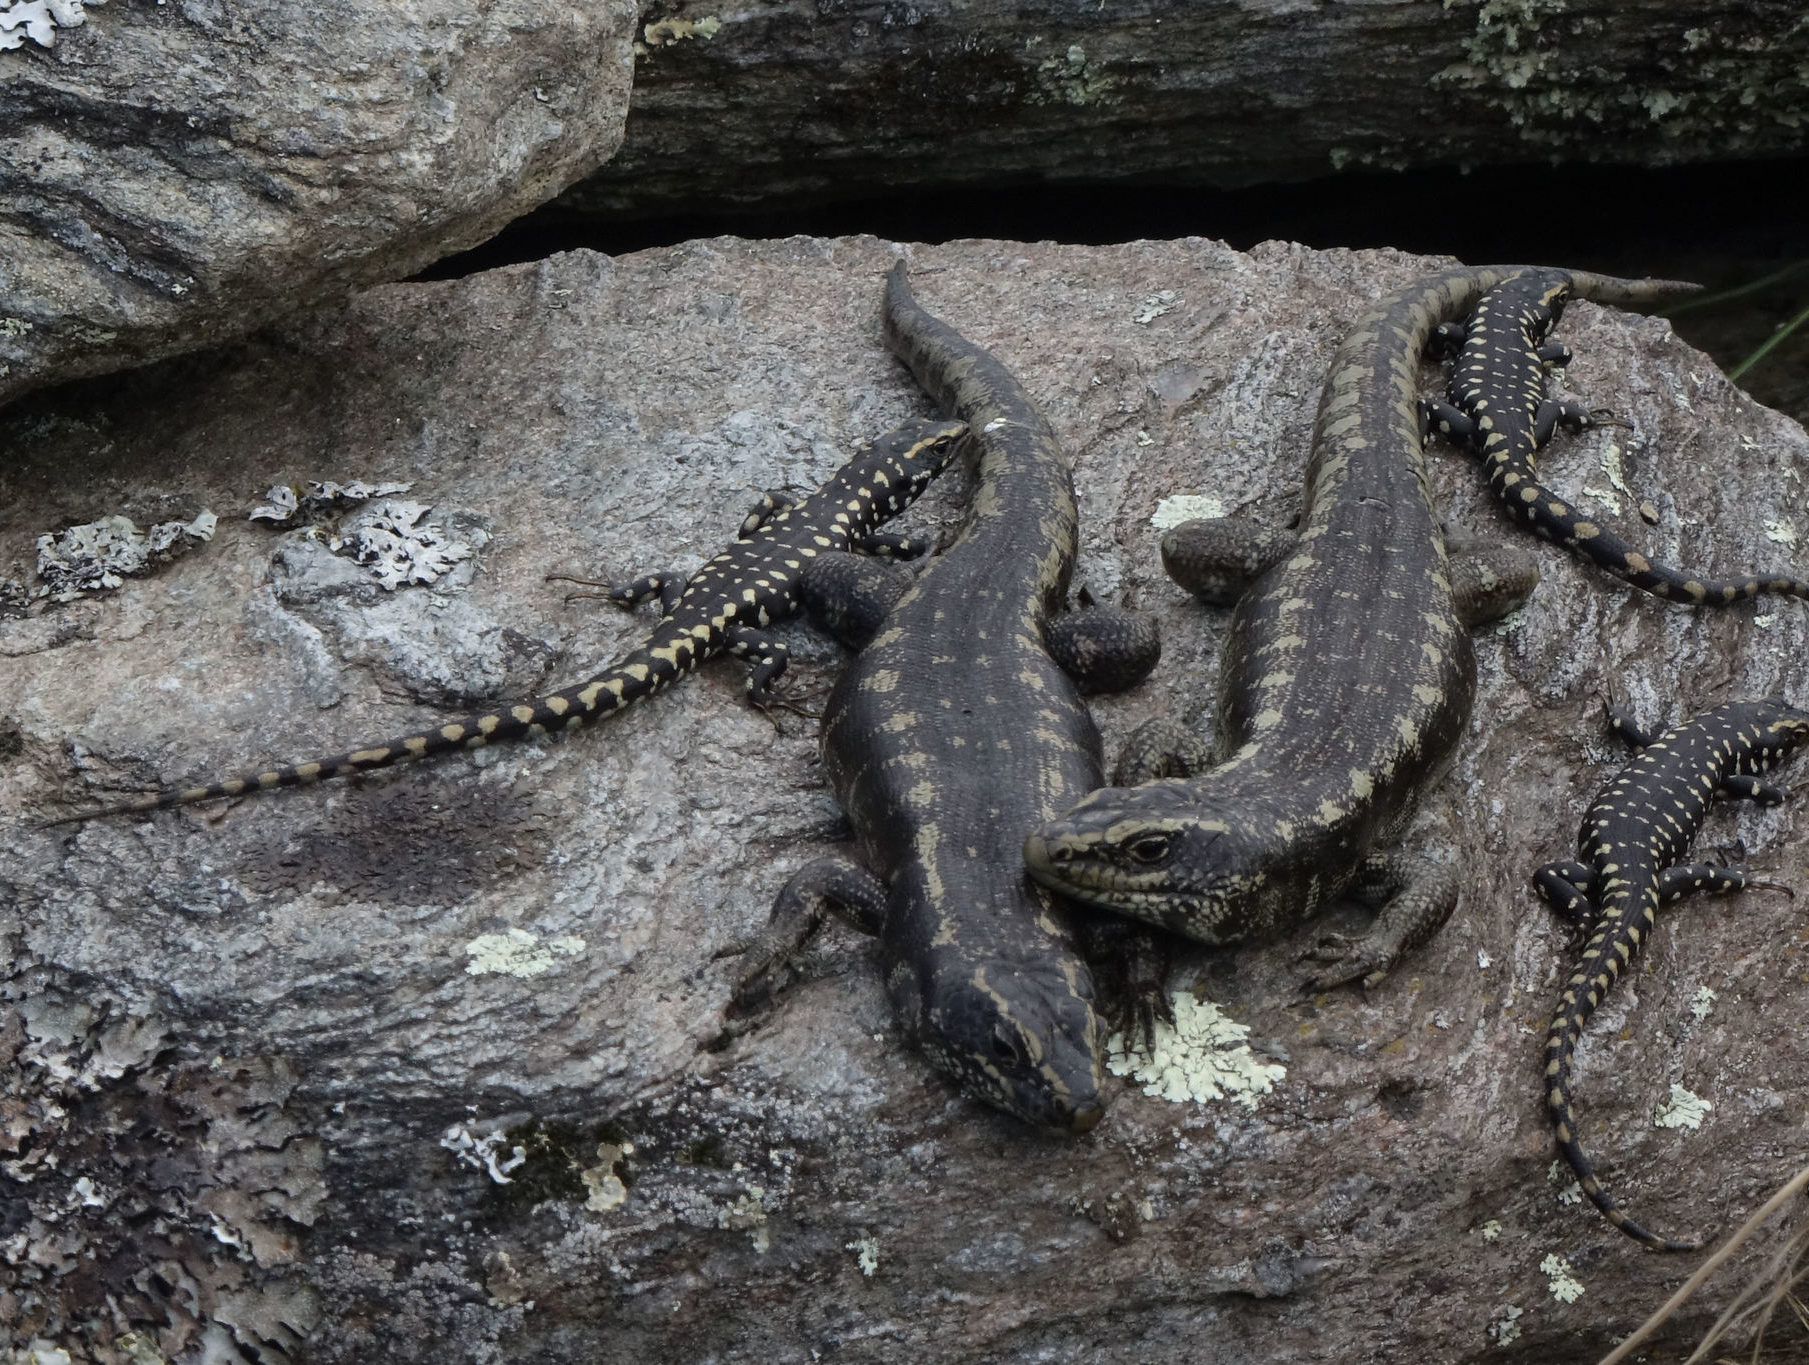 two large skinks and three small skinks on a rock